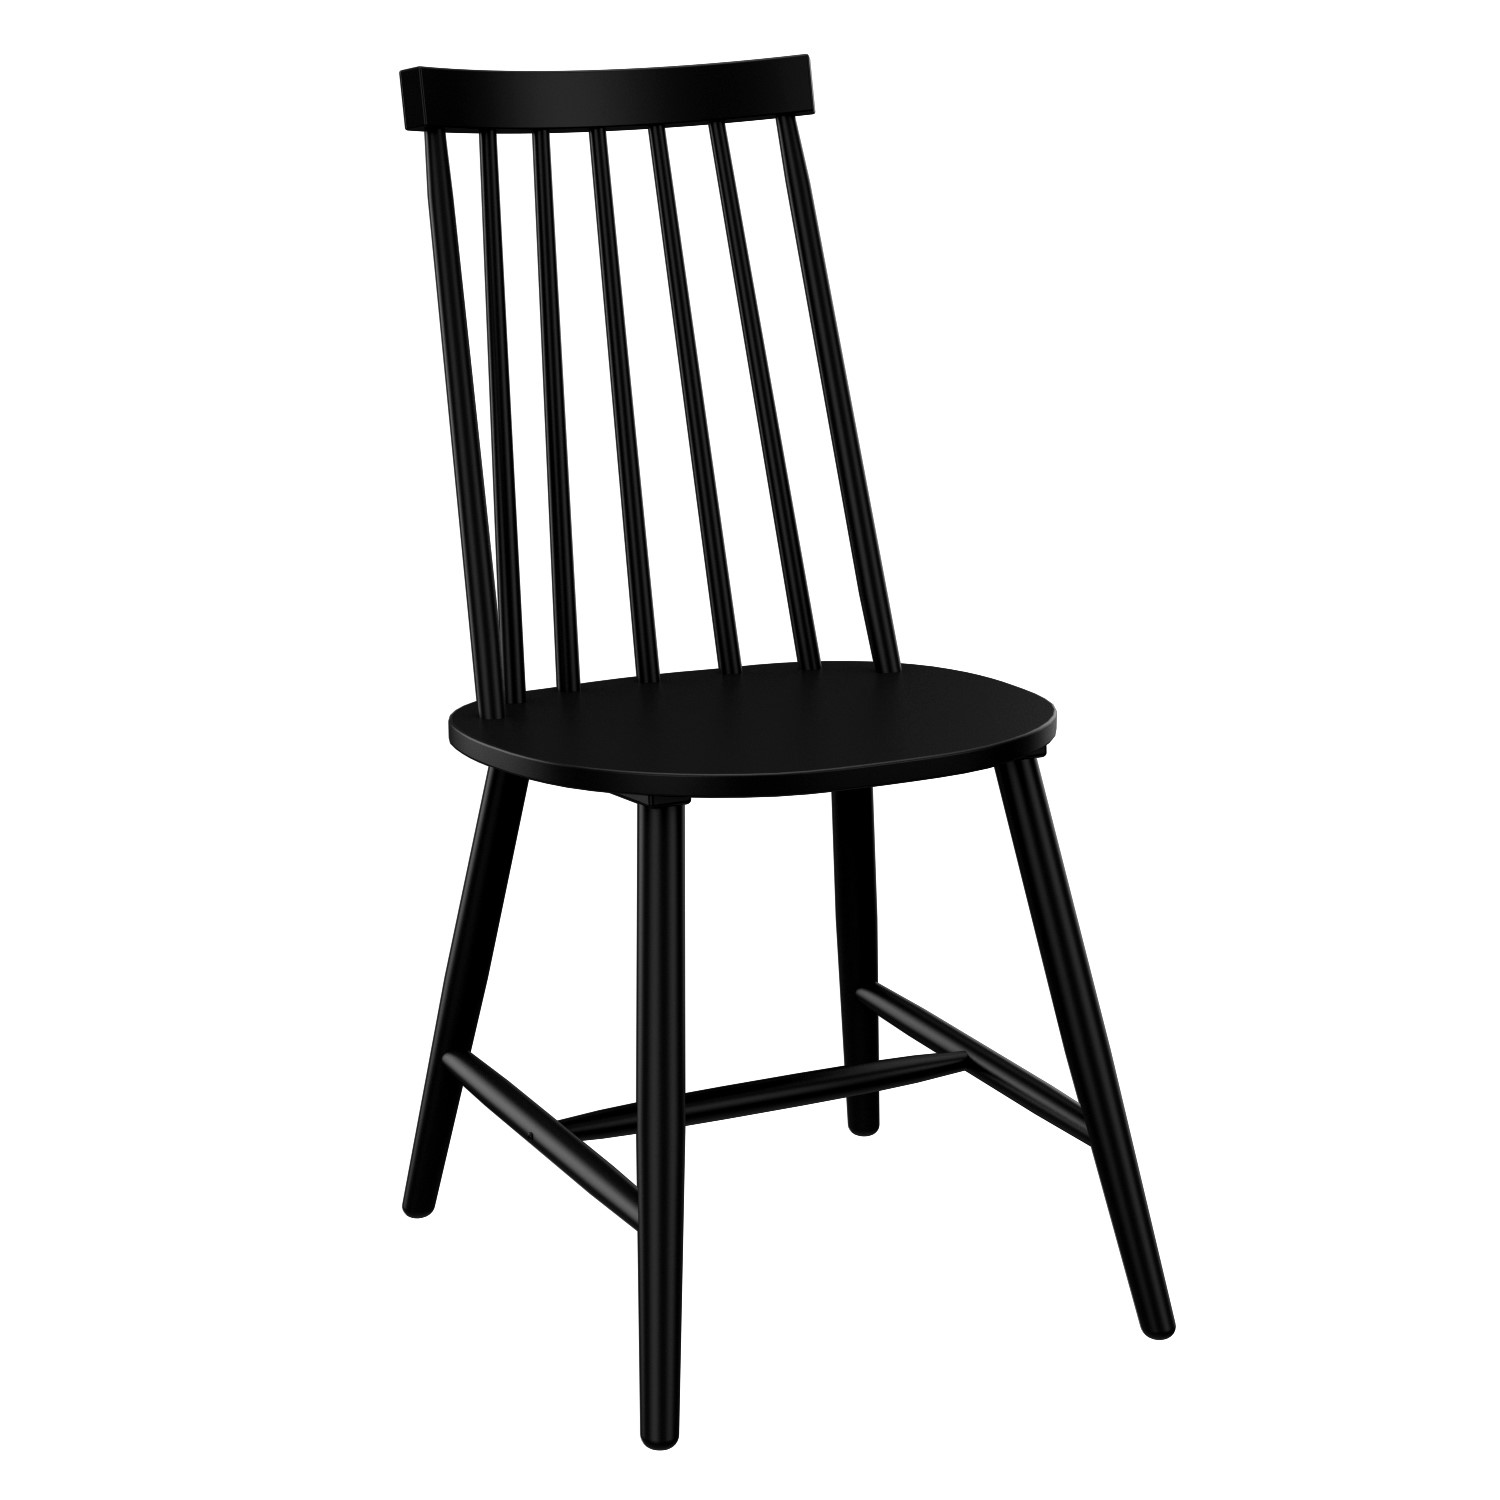 Set of 2 Black Wooden Spindle Dining Chairs - Cami - Furniture123